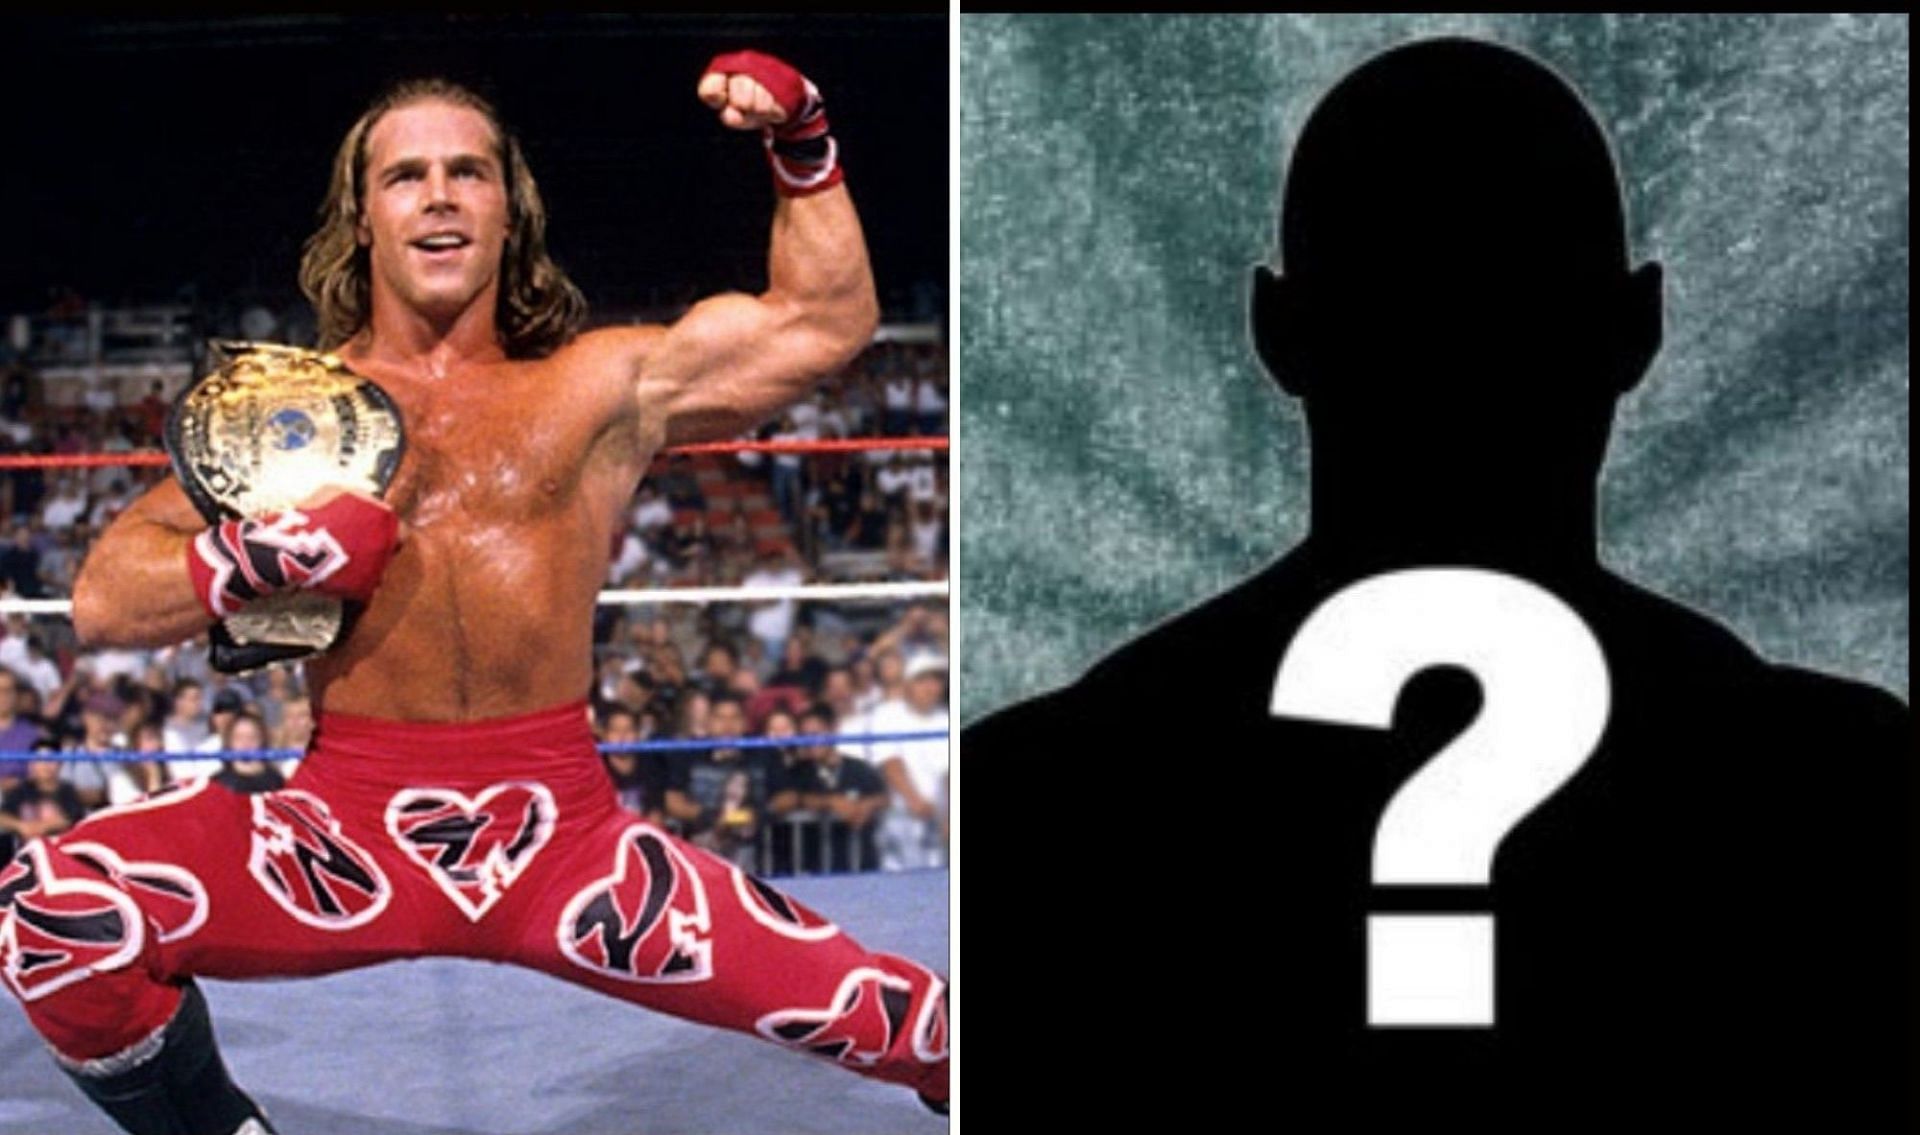 Shawn Michaels was recently compared to an AEW star